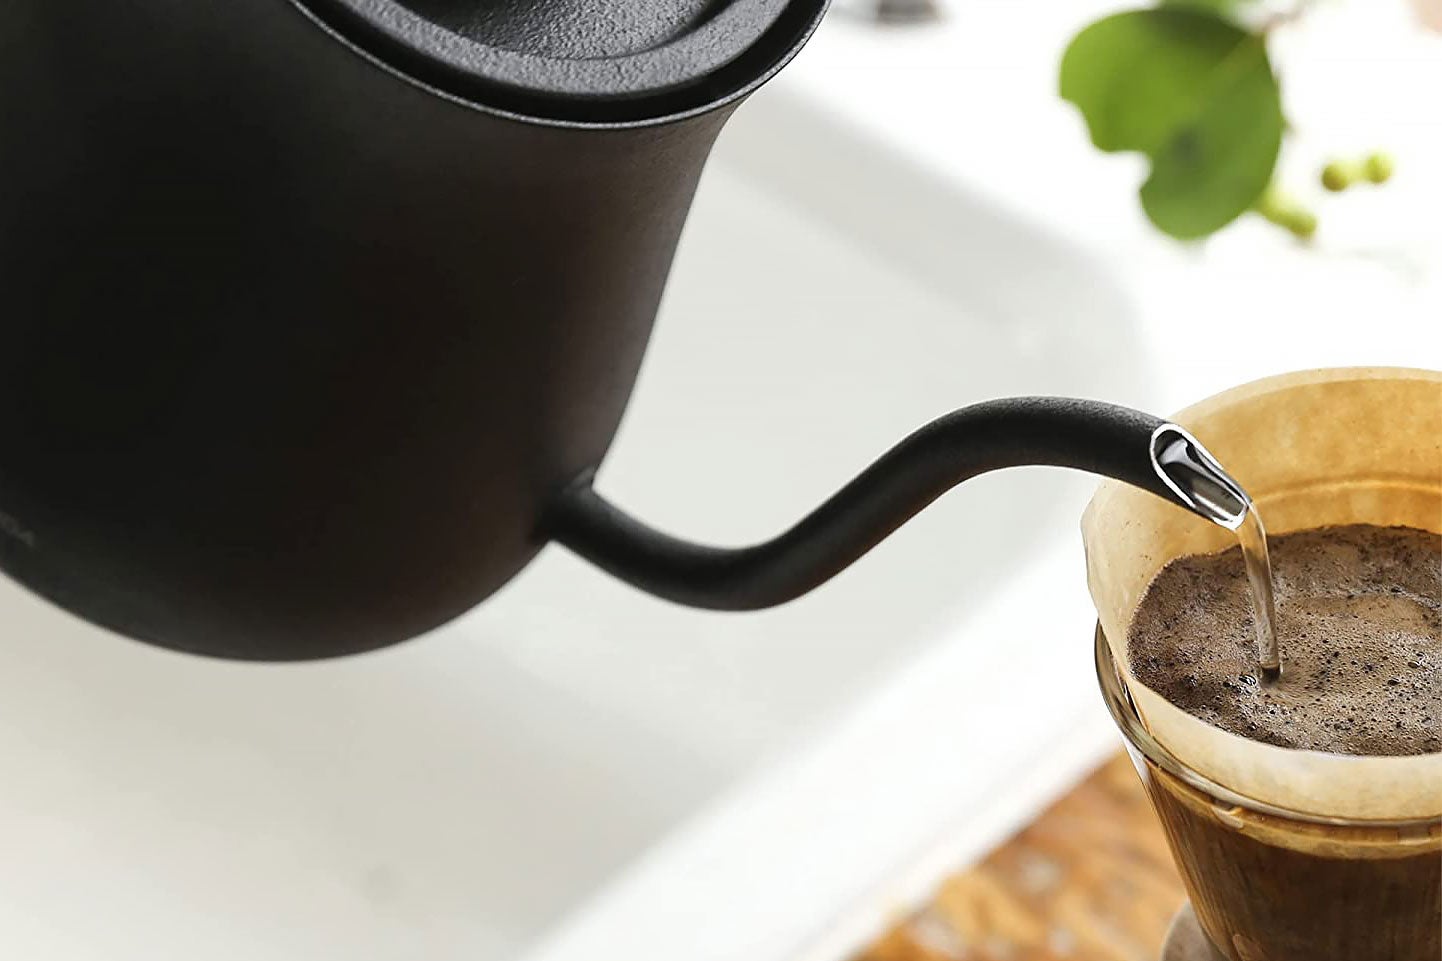 Great electric gooseneck kettle for under $100 : r/pourover